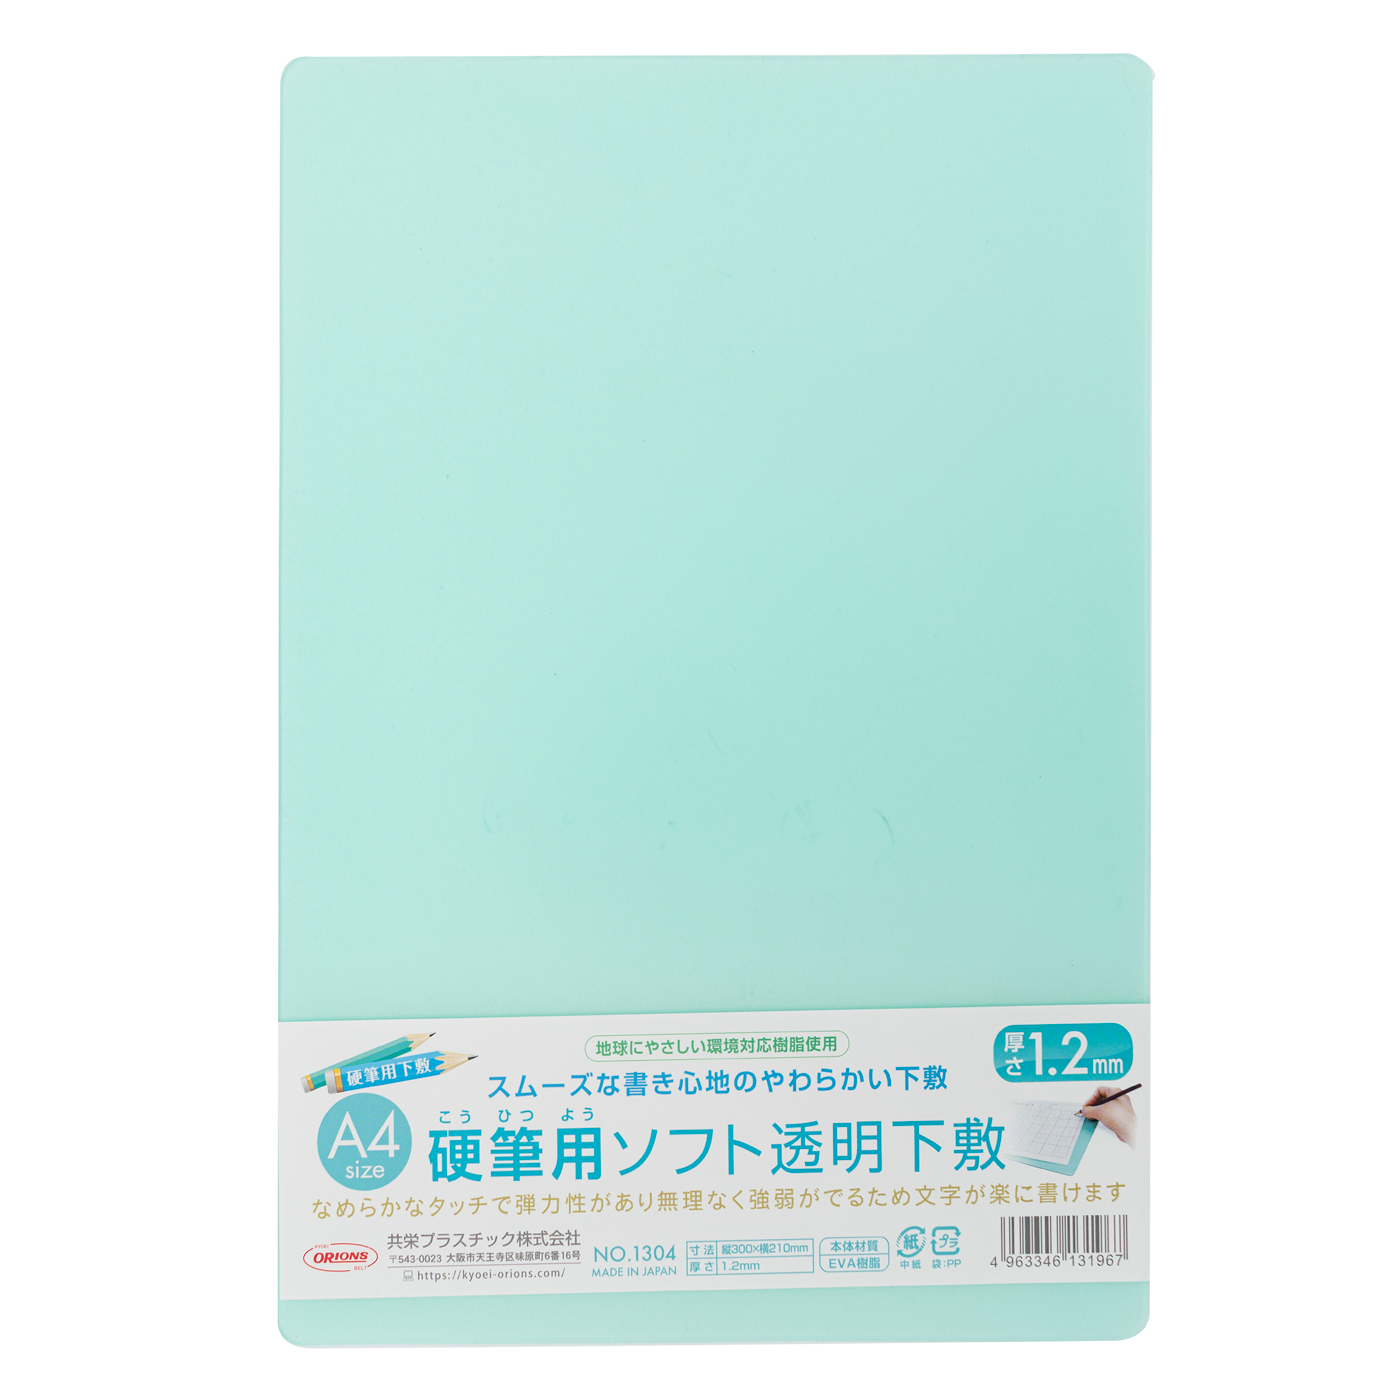 Kyoei Orions- Writing Mat Soft A4